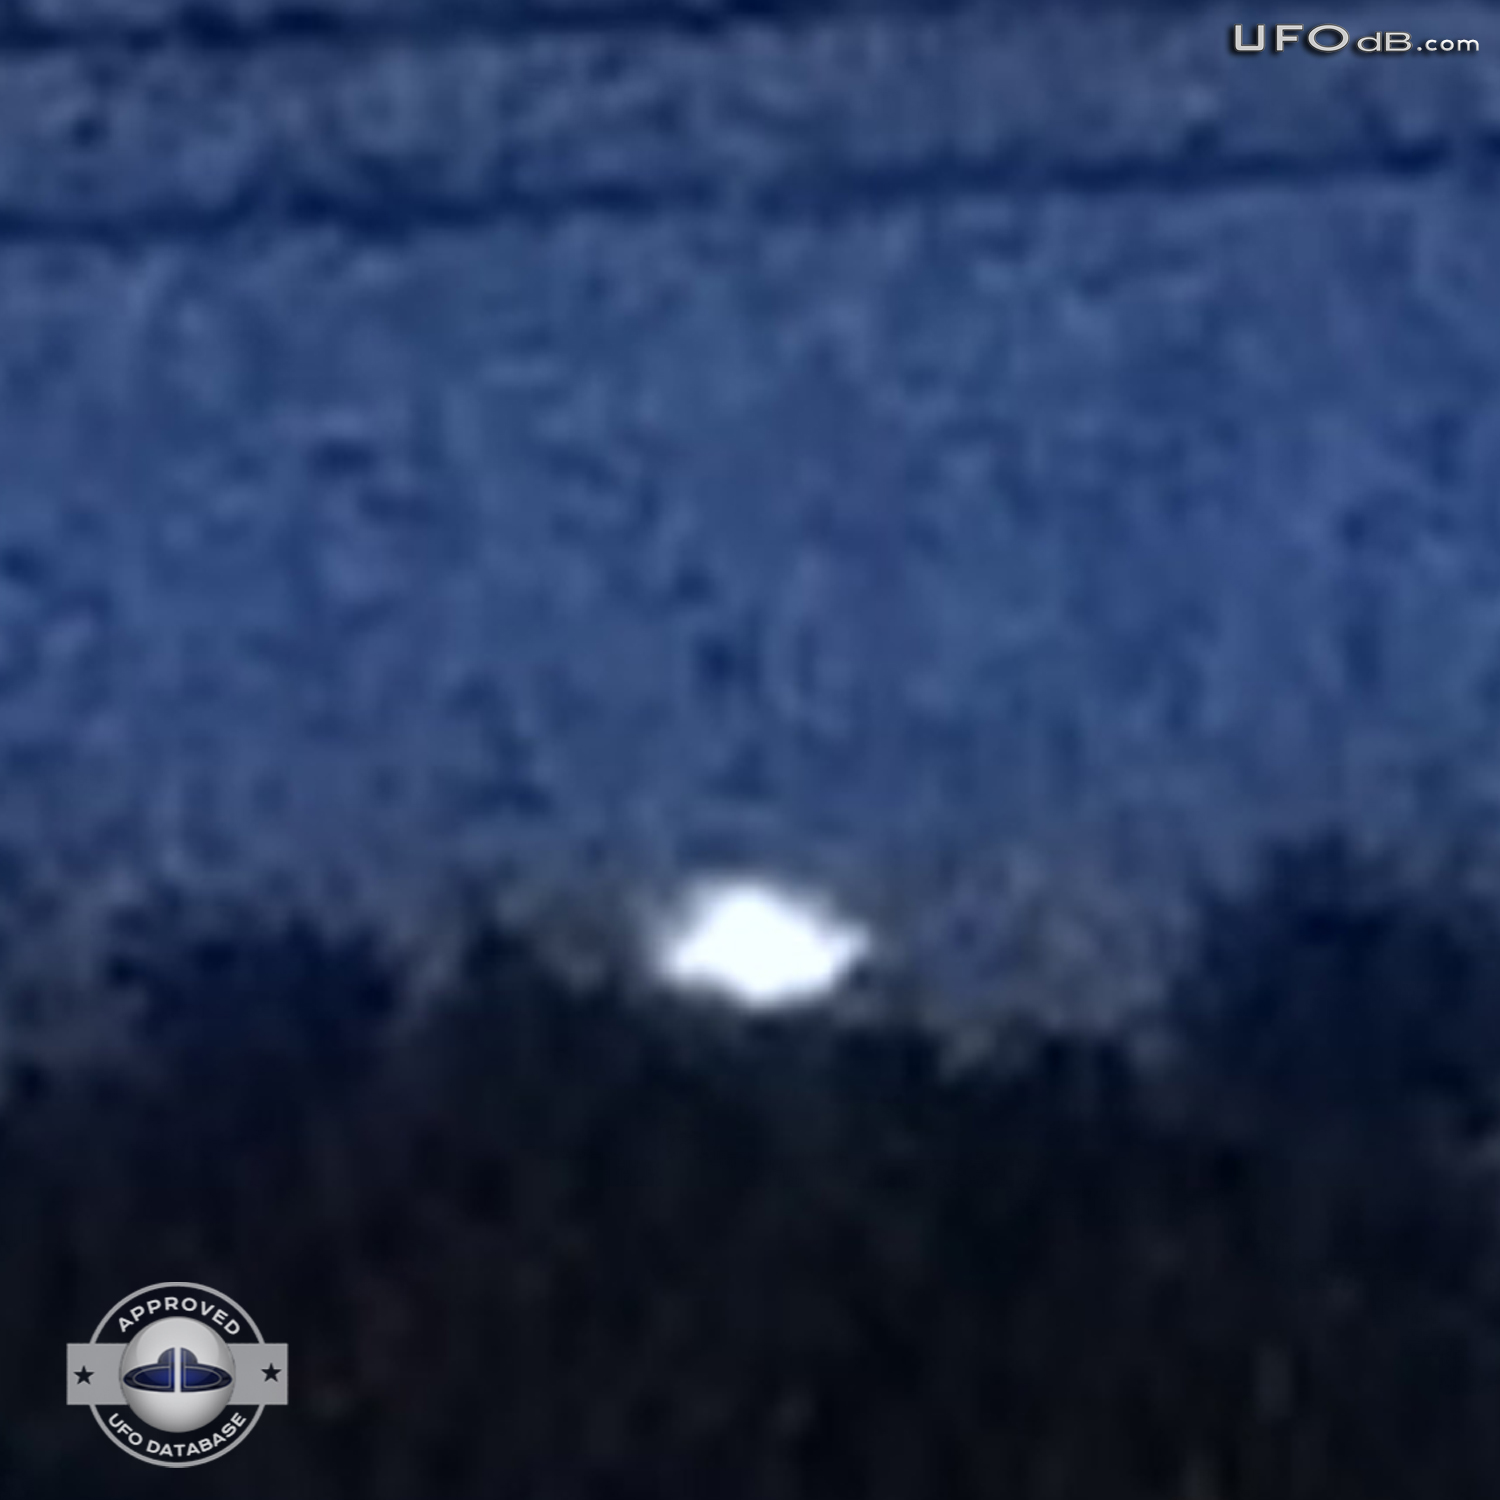 Maryland, USA | UFO seen from Walkersville and Thurmont | June 6 2011 UFO Picture #342-3